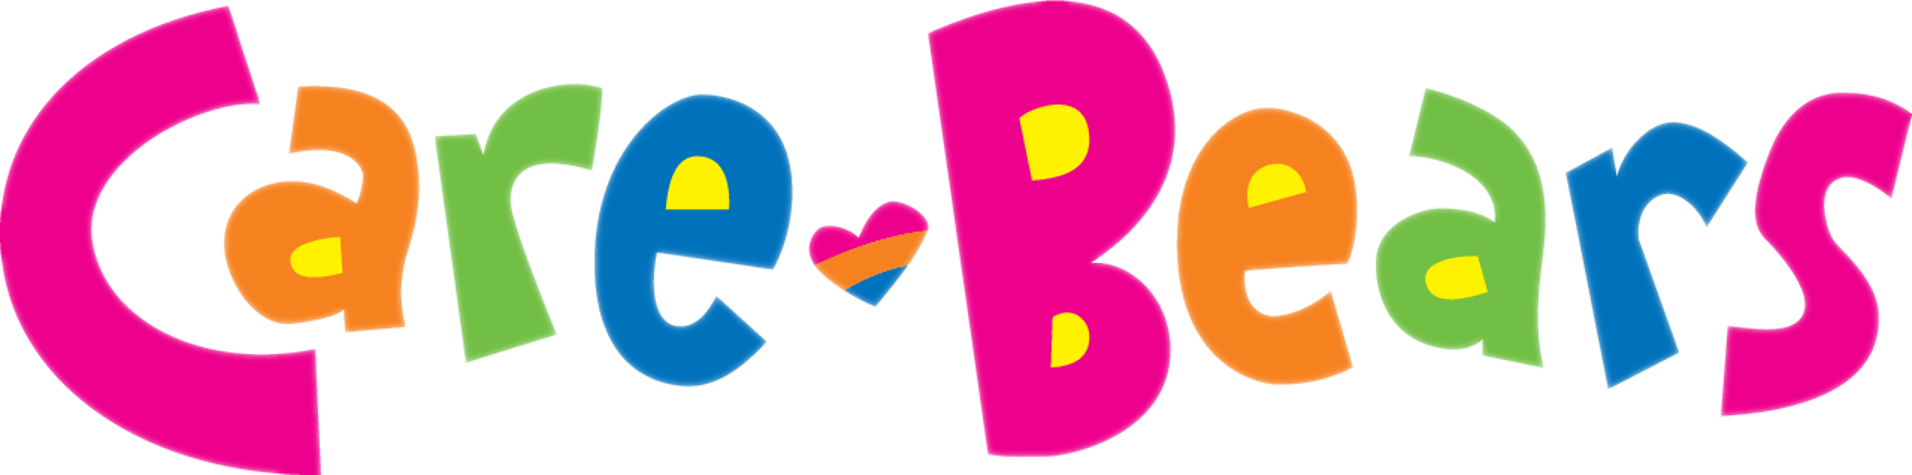 Care Bears Png Pack By Kaylor2013 Care Bears Png Pack - Care Bears Adventures In Care A Lot (1912x475)